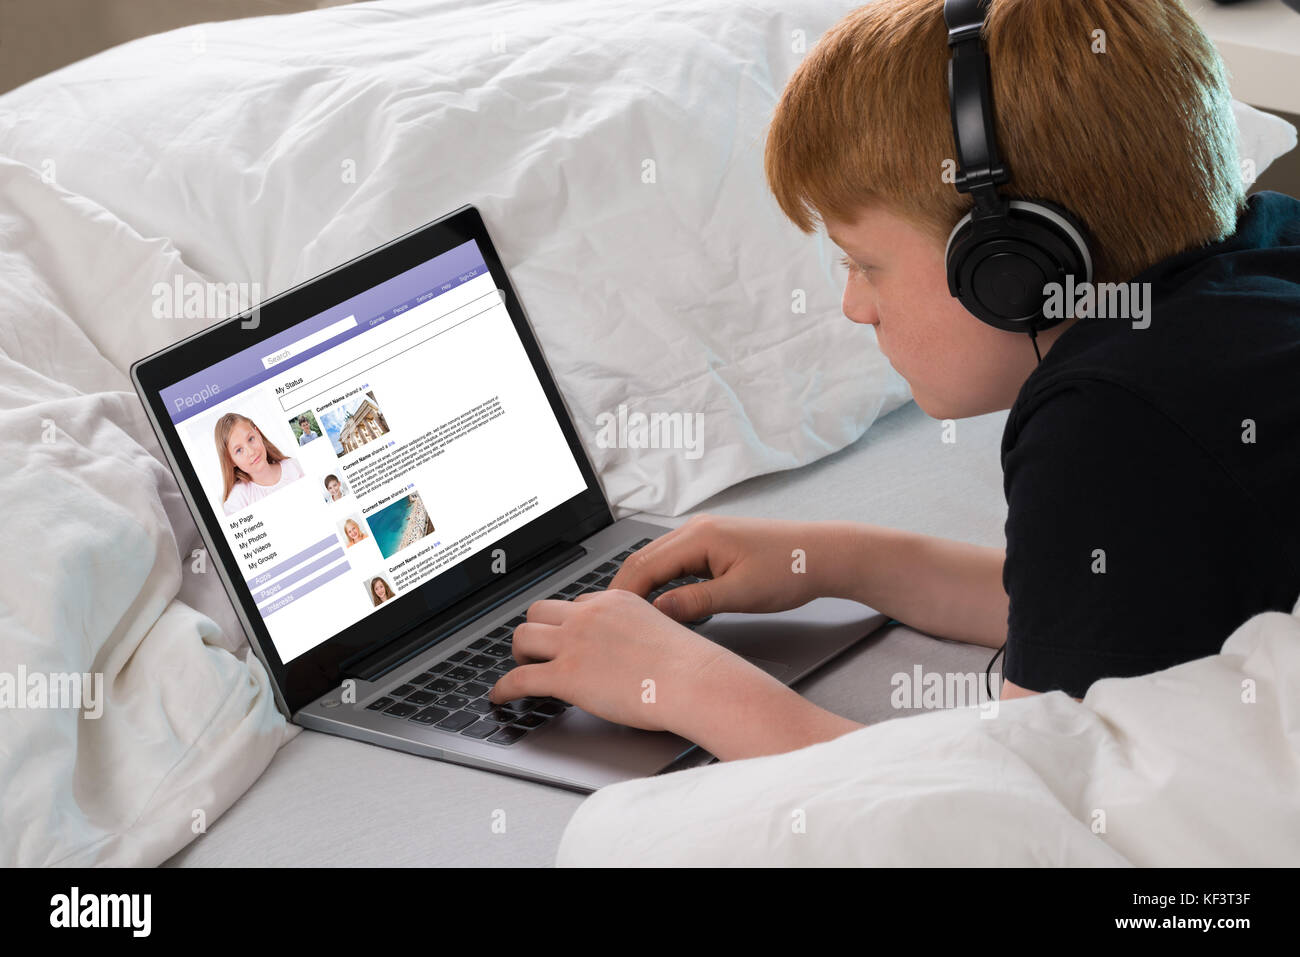 Boy Listening To Music While Chatting On Social Networking Site Using Laptop Stock Photo